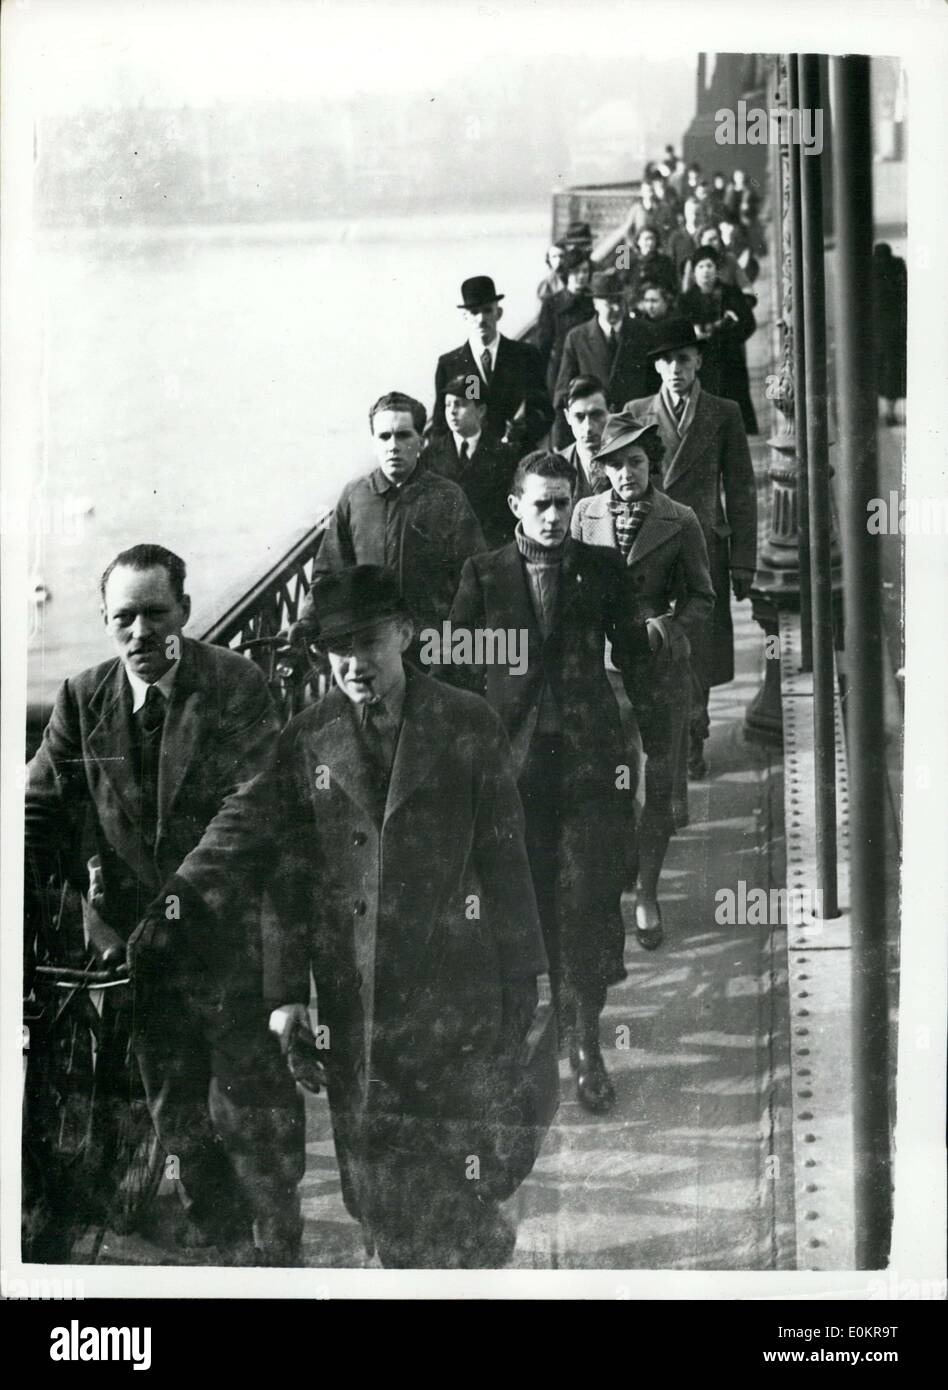 Mar. 30, 1939 - people walking to work as a result of  Bent explosion. Stock Photo